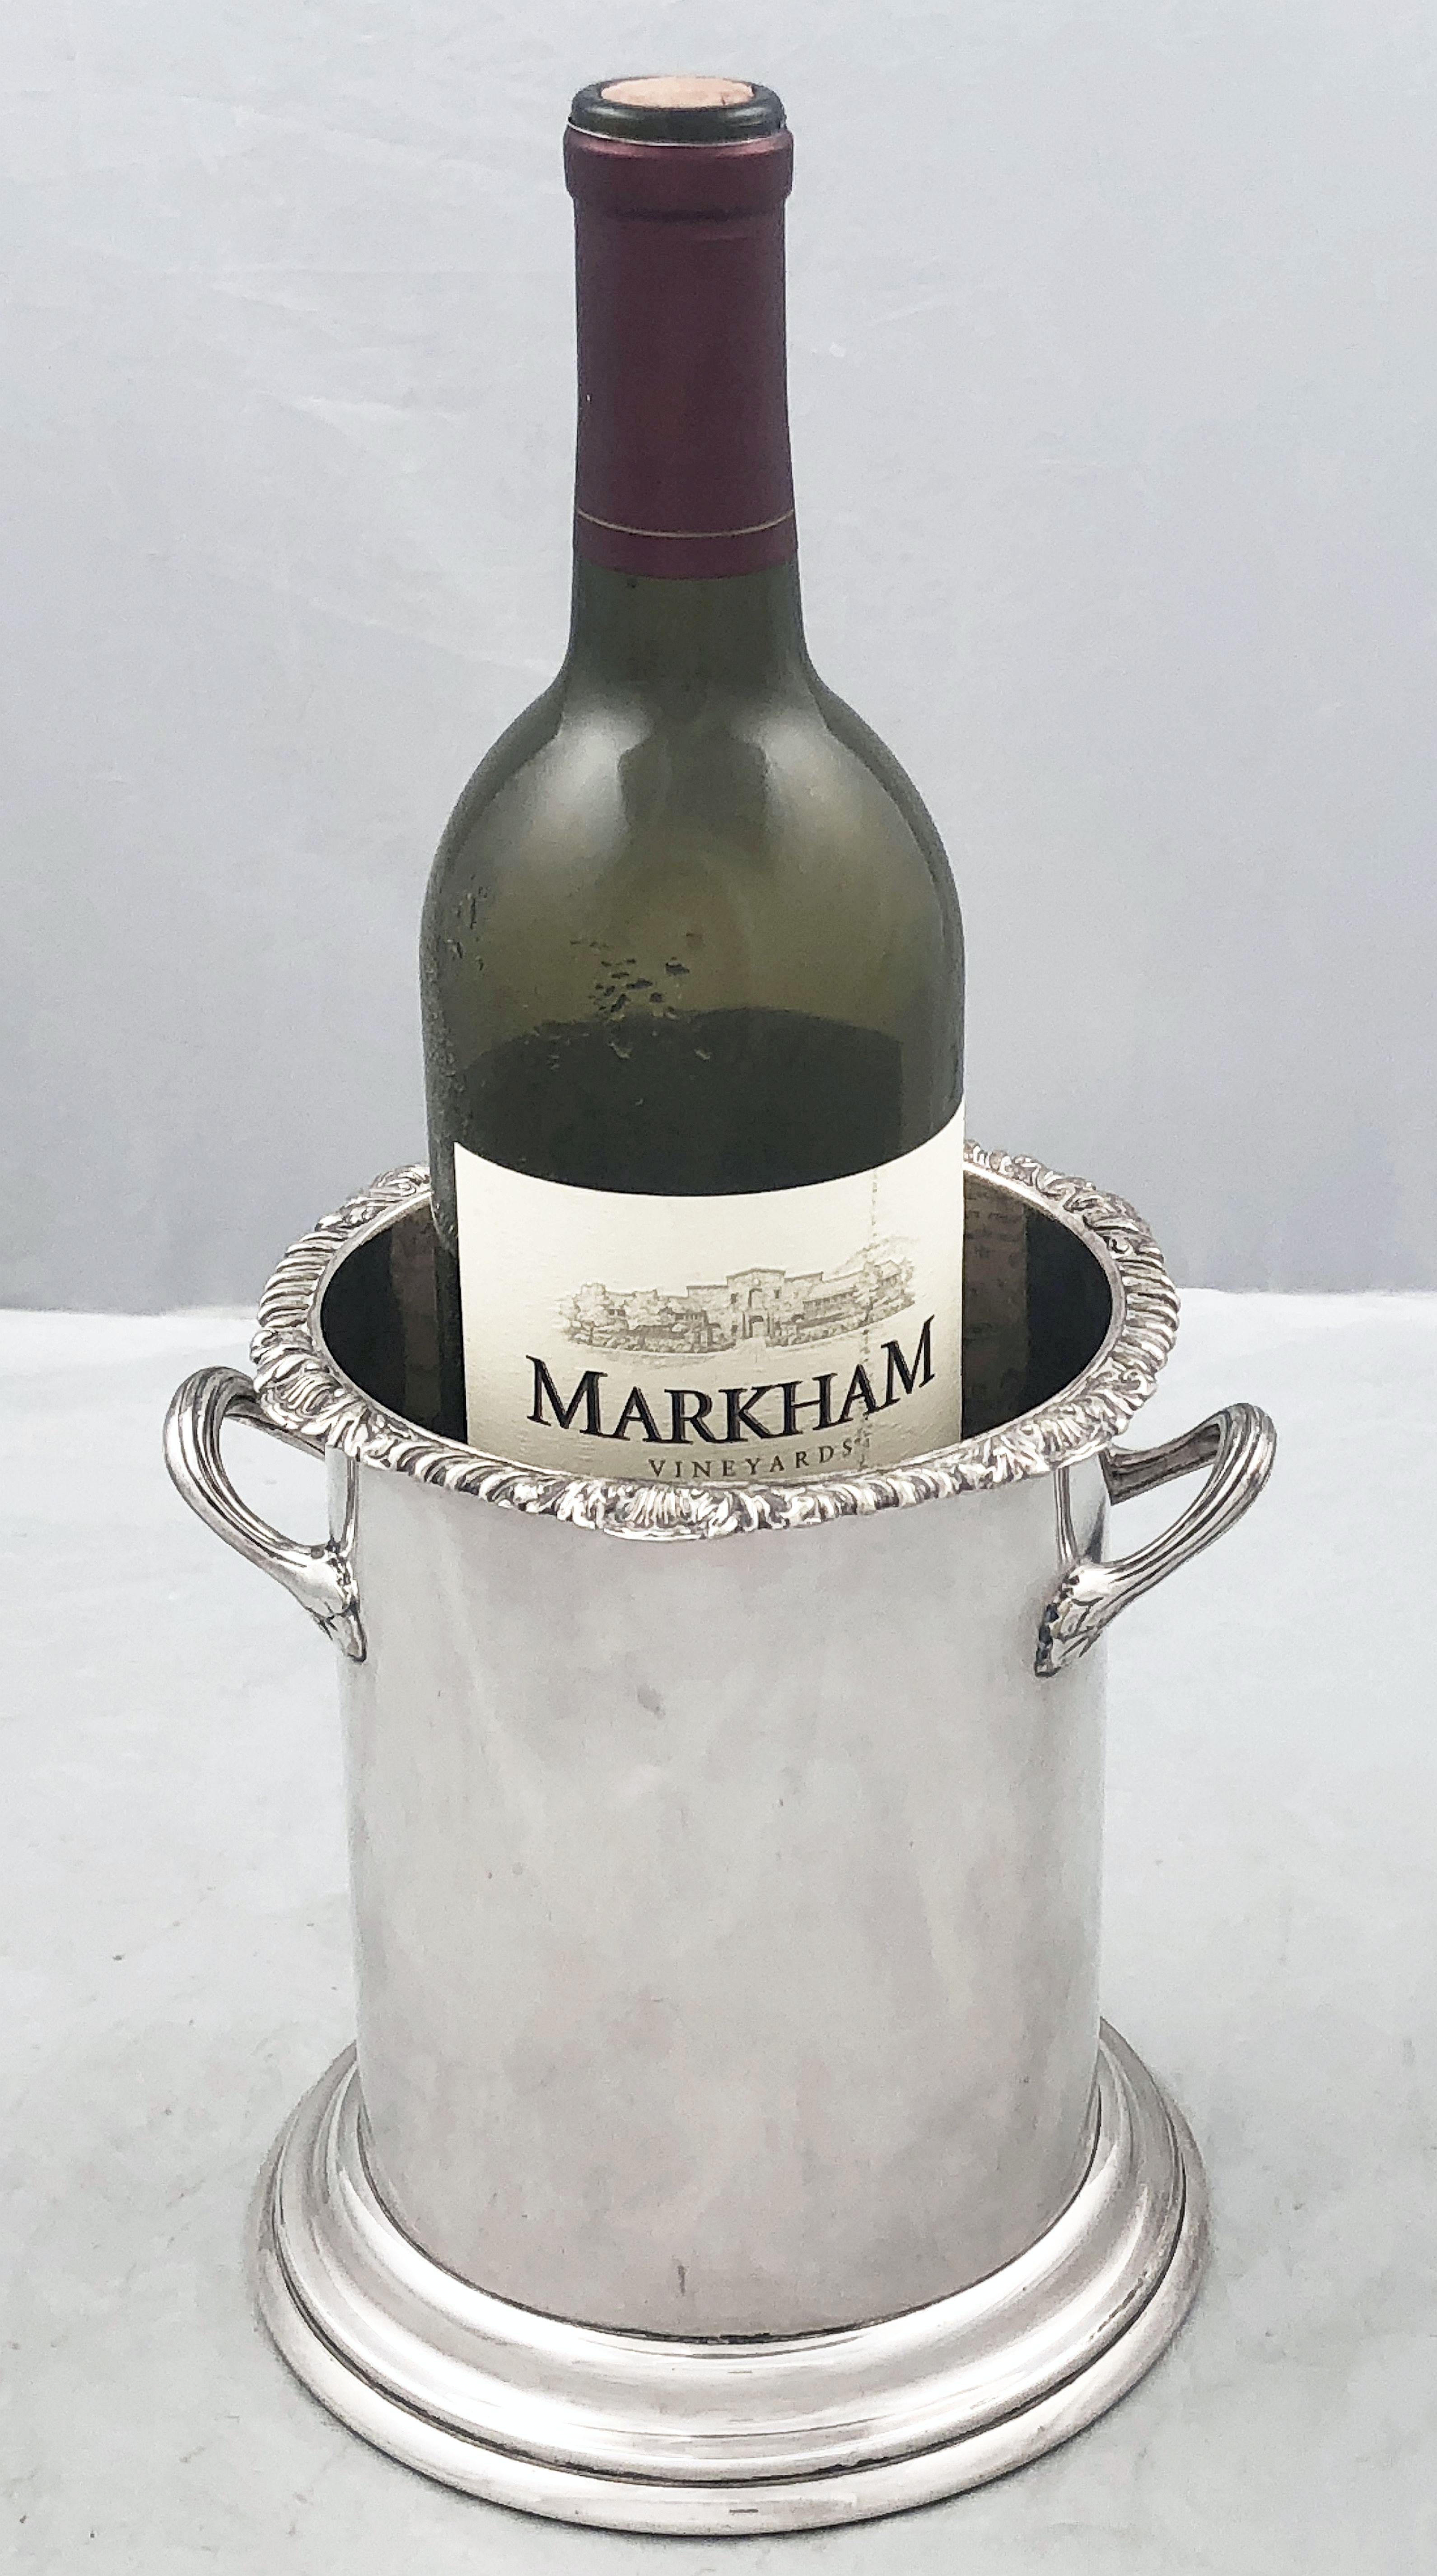 A handsome English wine and champagne bottle display holder or coaster of fine plate silver, featuring a chased top edge, stylish opposing handles, and raised cylindrical base.

Designed to add a fine level of elegance to the presentation of wine at